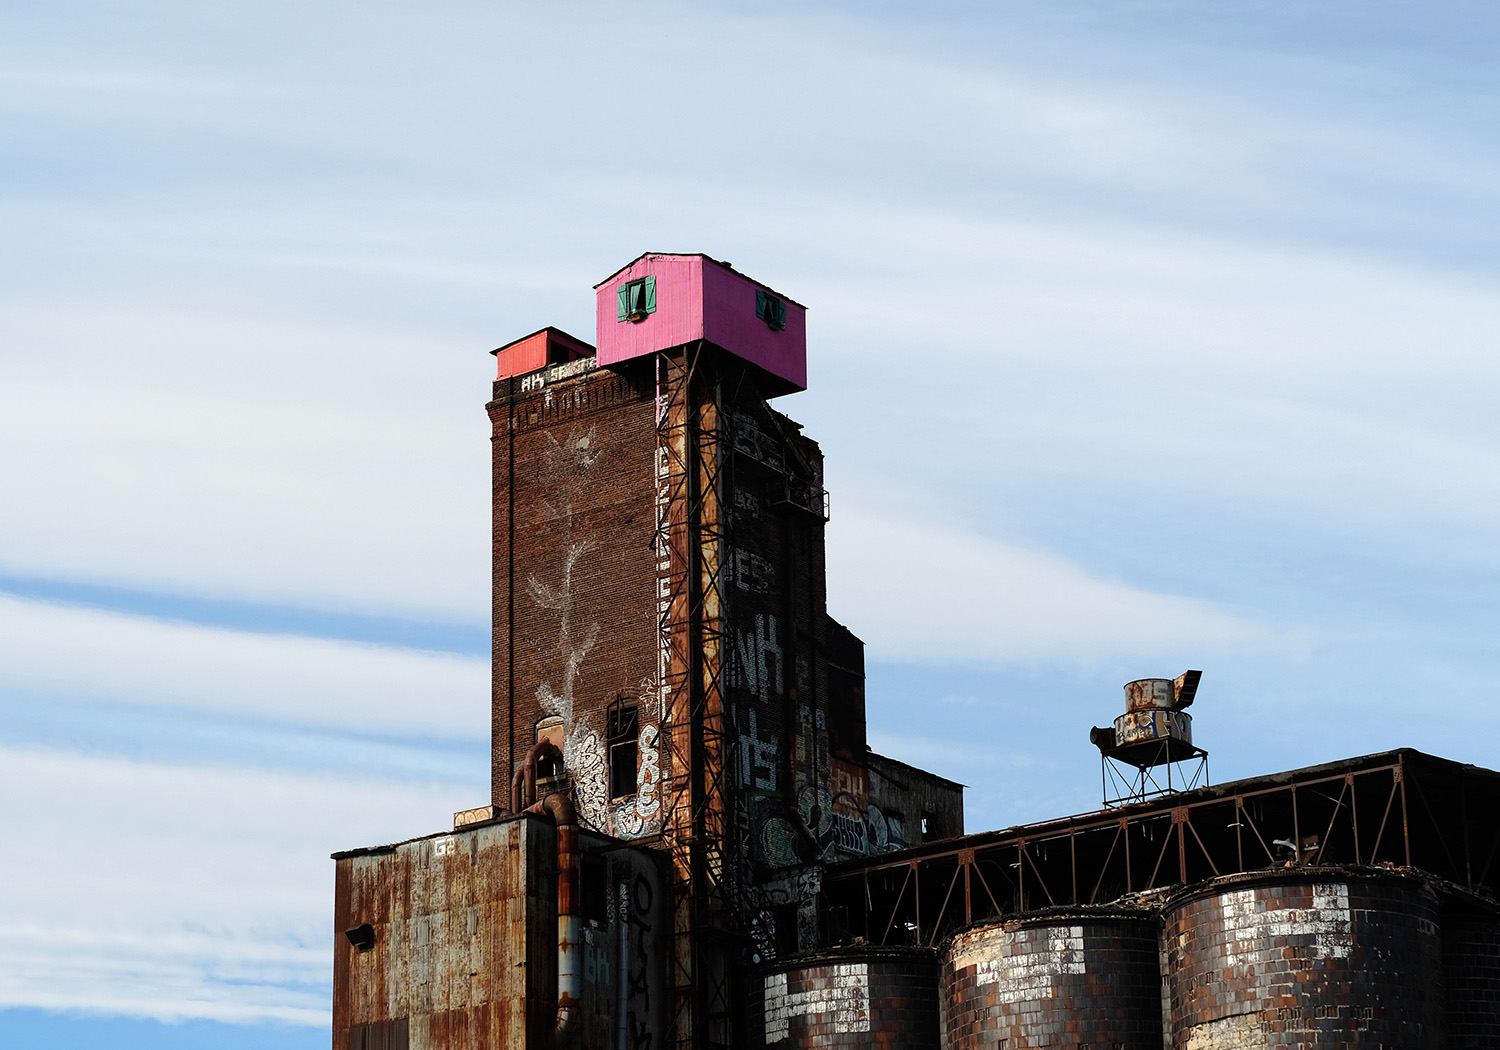 A shed painted pink atop the Canada Malting Silos.